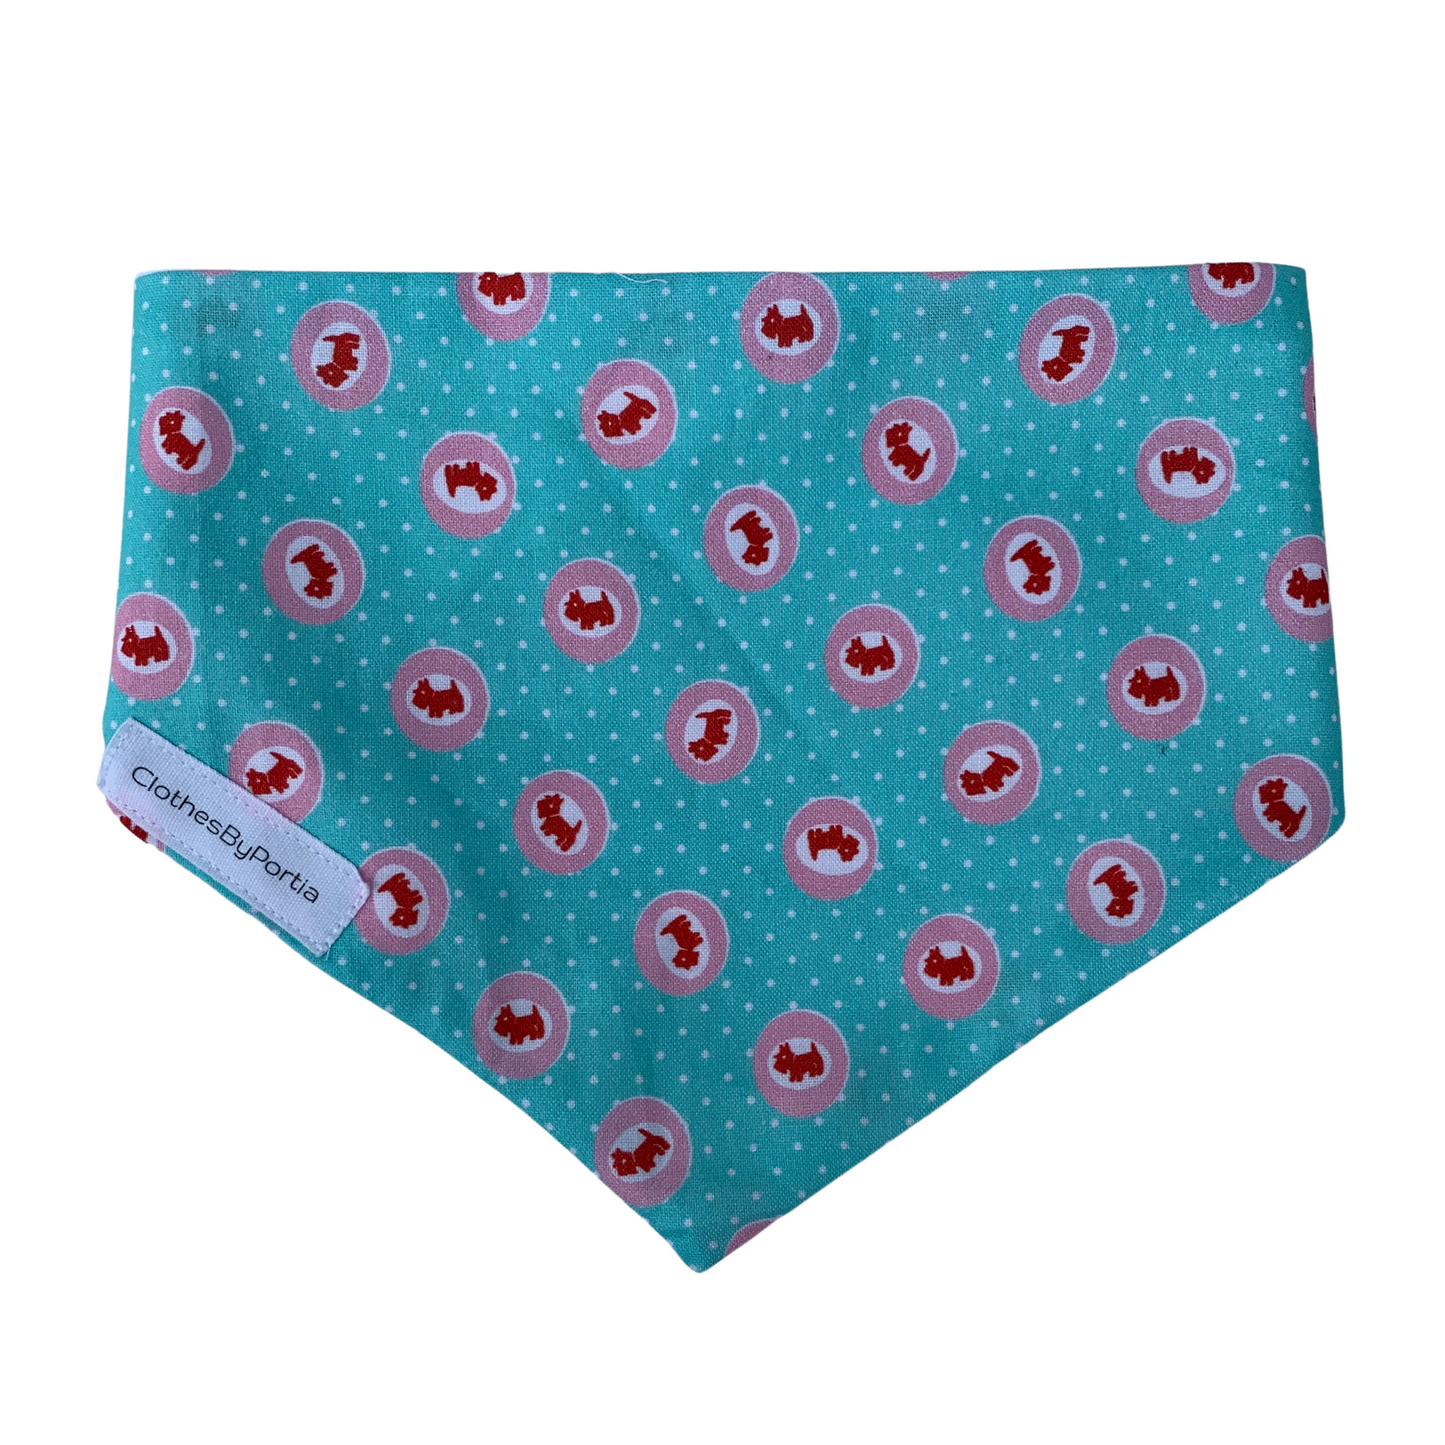 turquoise dog bandana with small pink circles containing red scotty dogs made in New Zealand